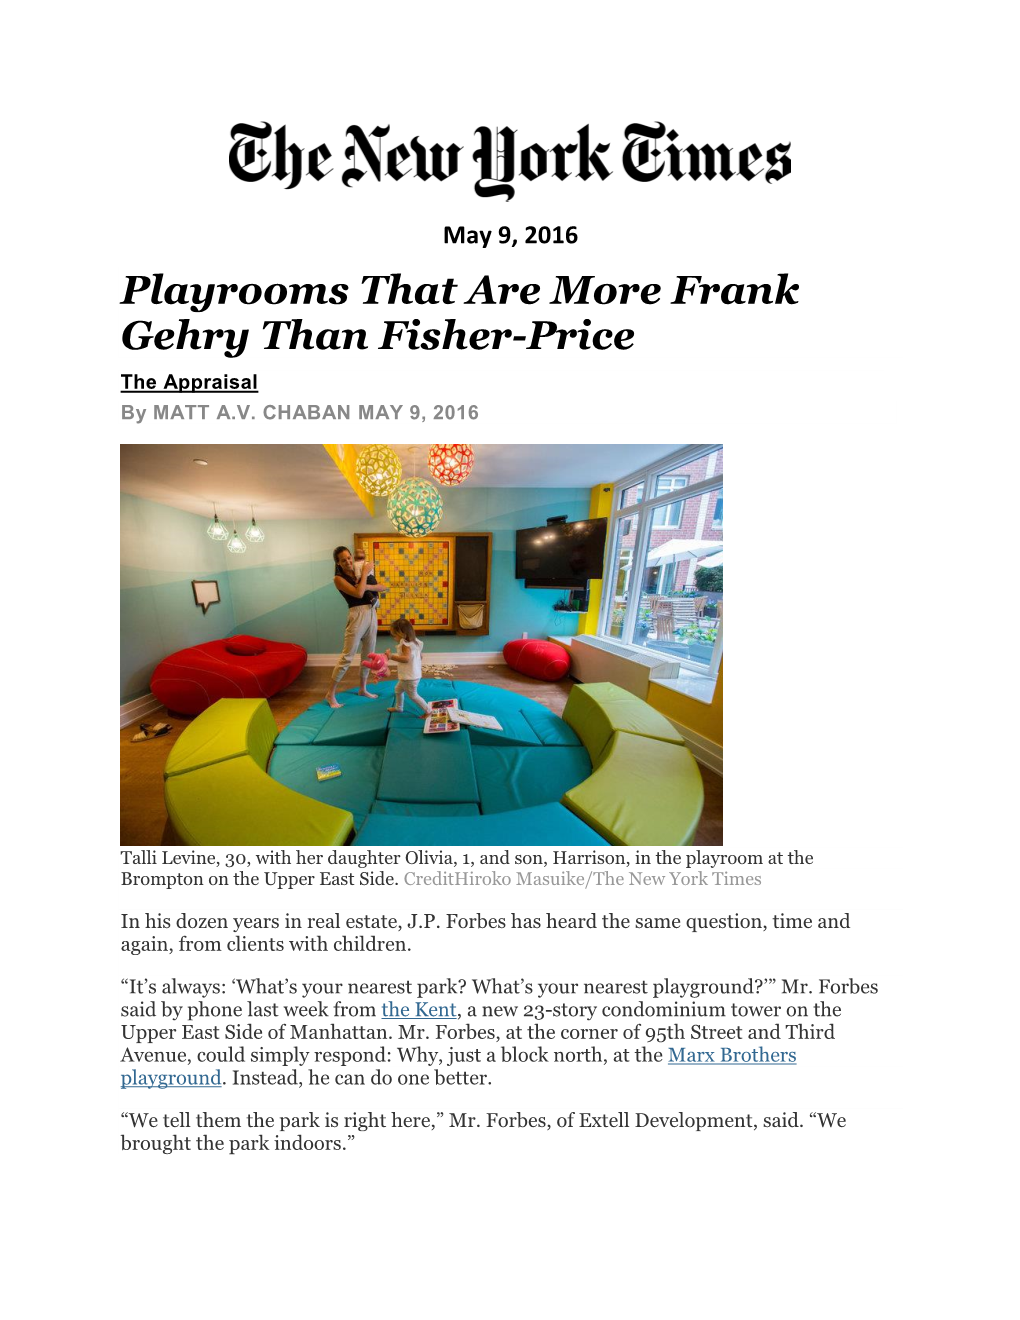 Playrooms That Are More Frank Gehry Than Fisher-Price Developed By